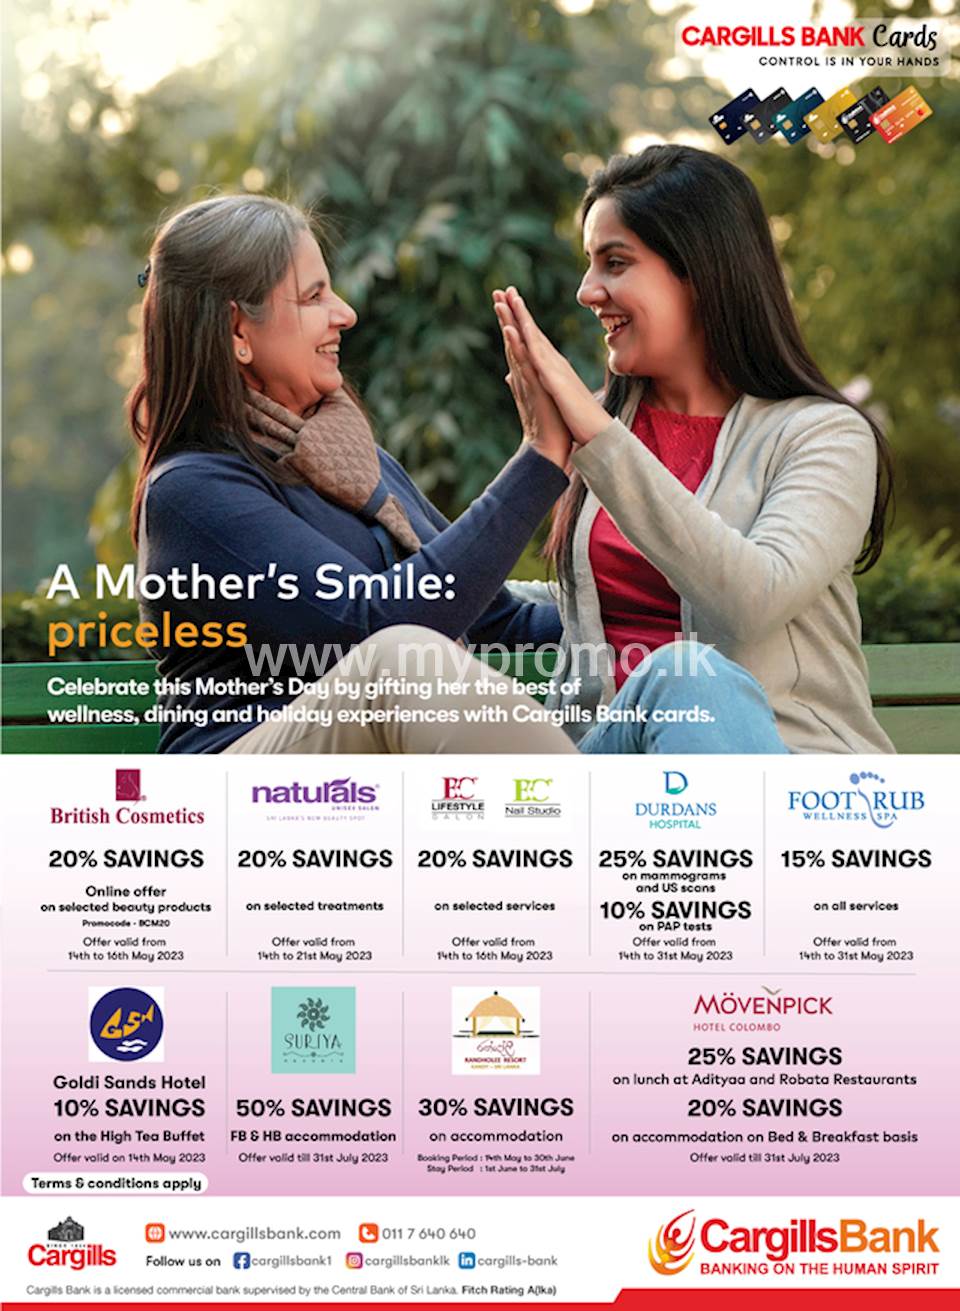 Give Your Mom the Ultimate Mother's Day Experience with Cargills Bank Cards